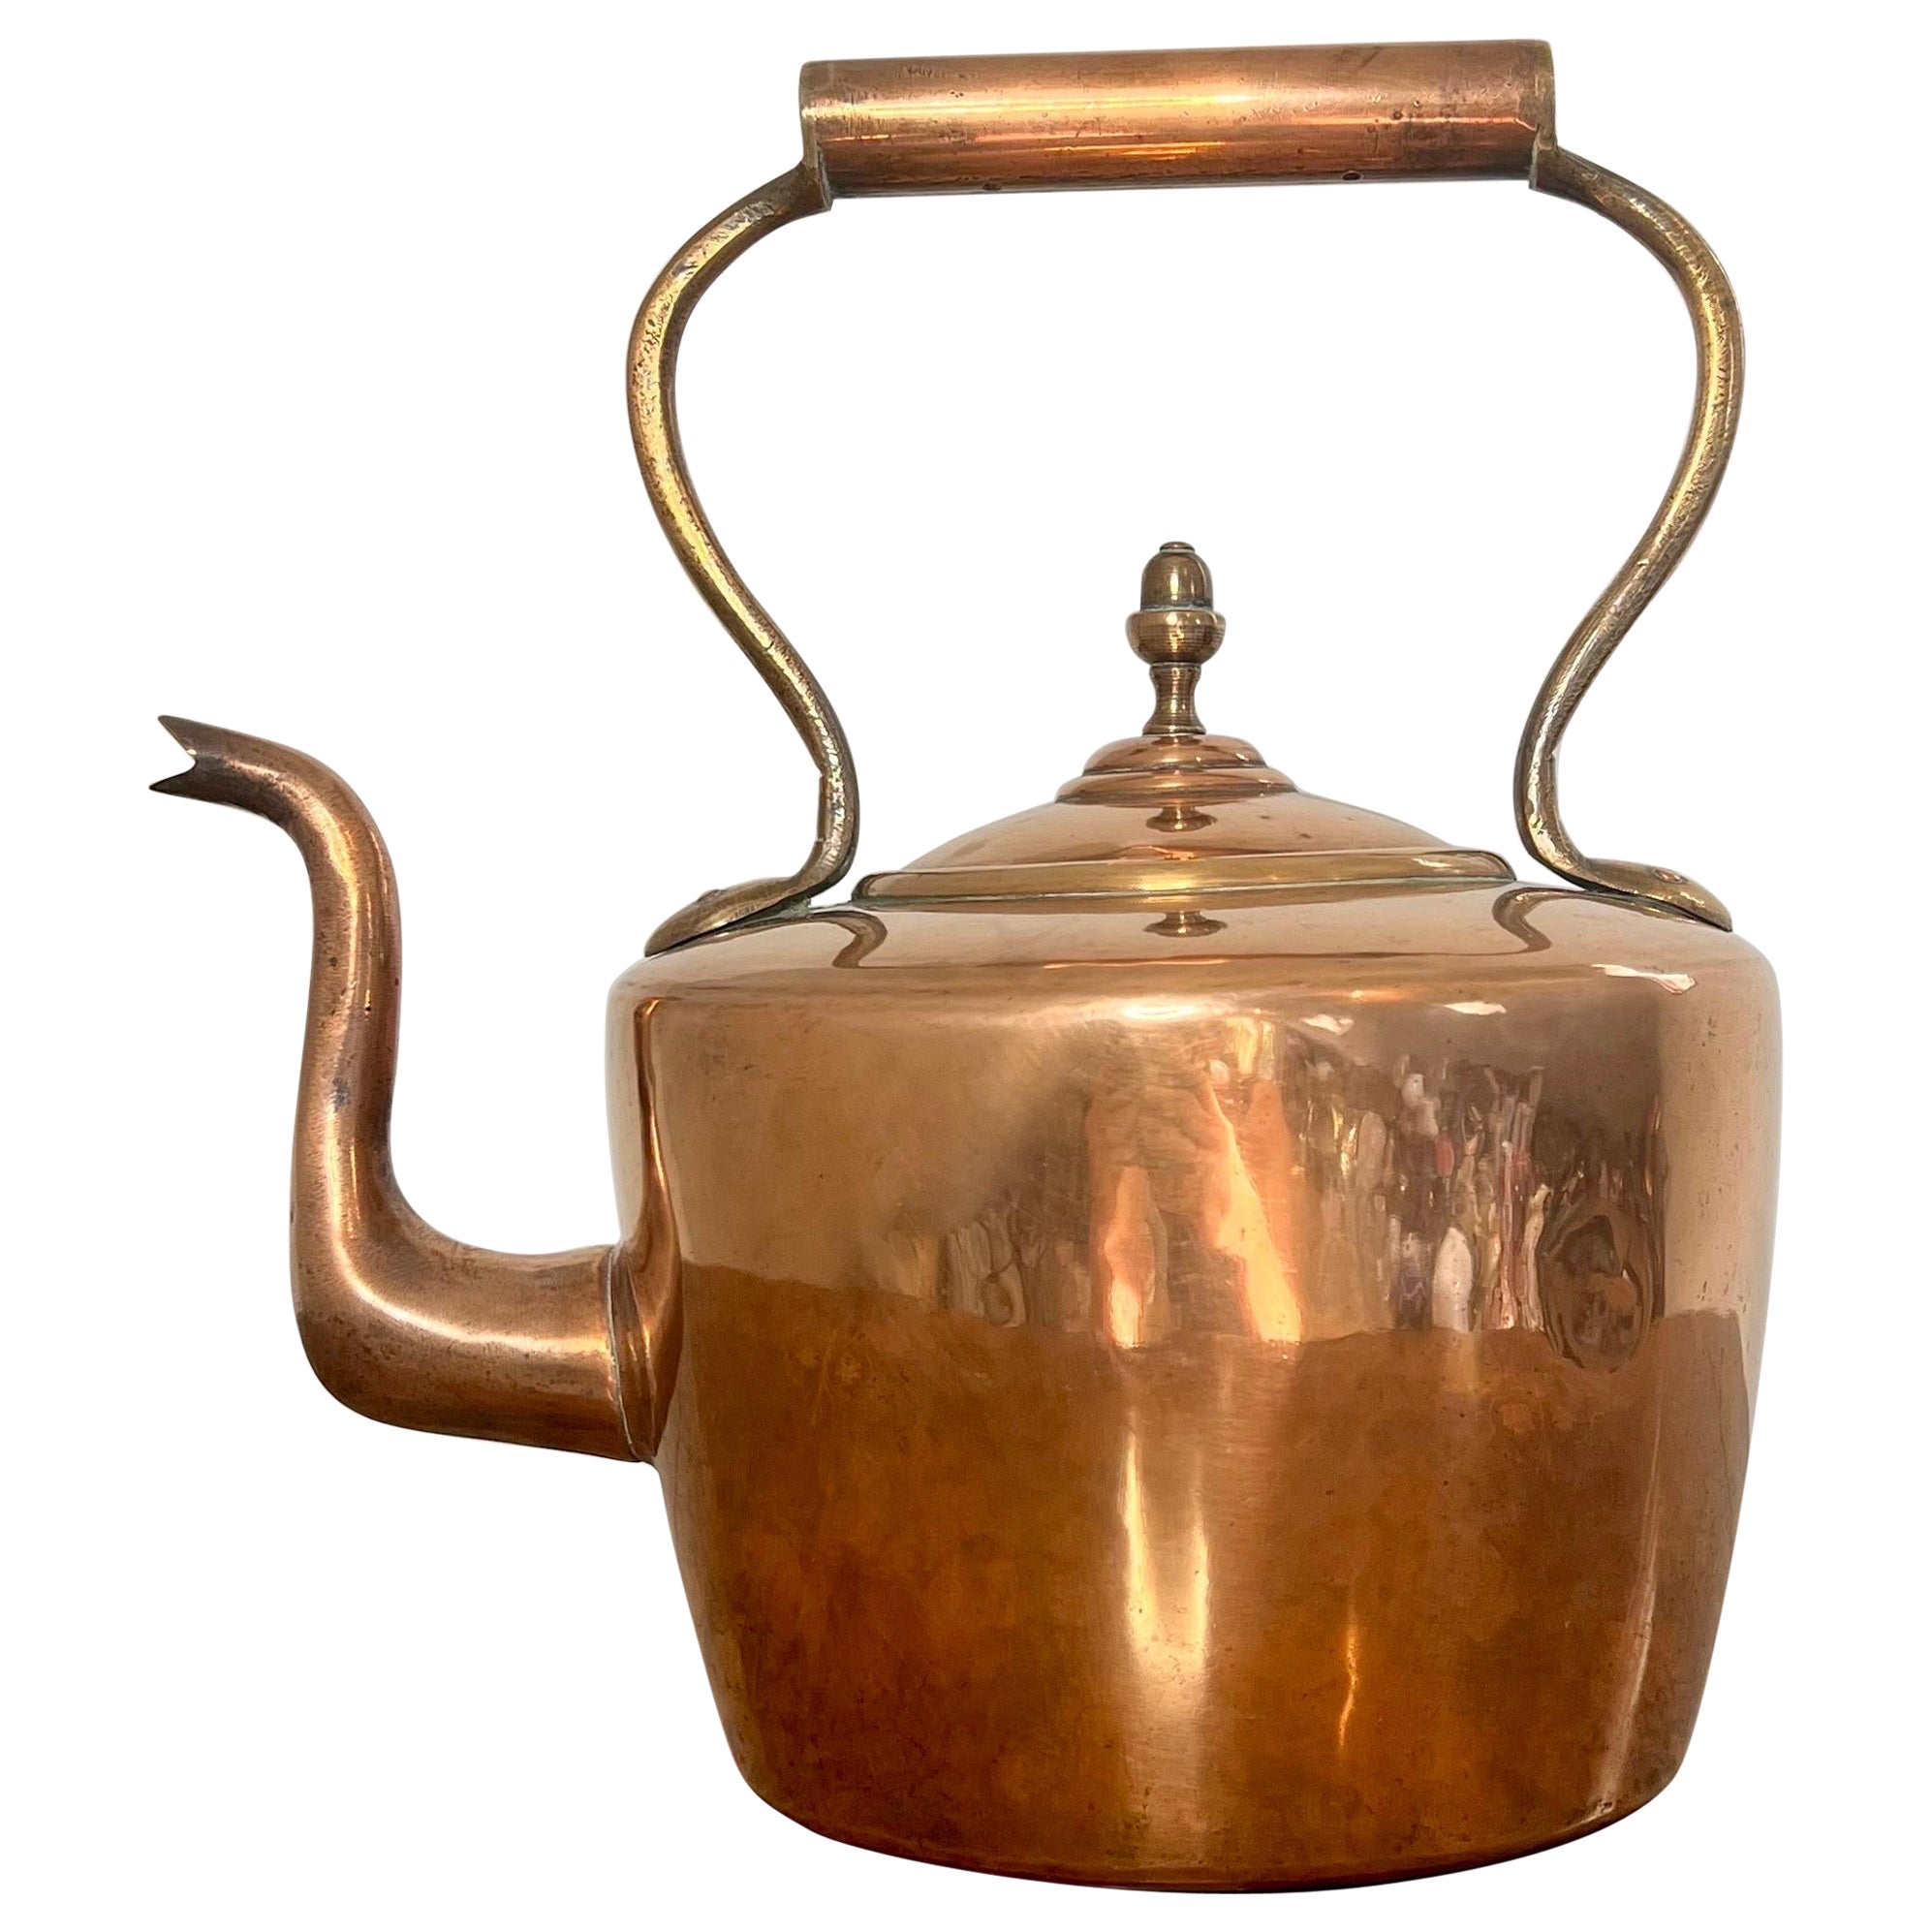 Quality antique George III copper kettle 